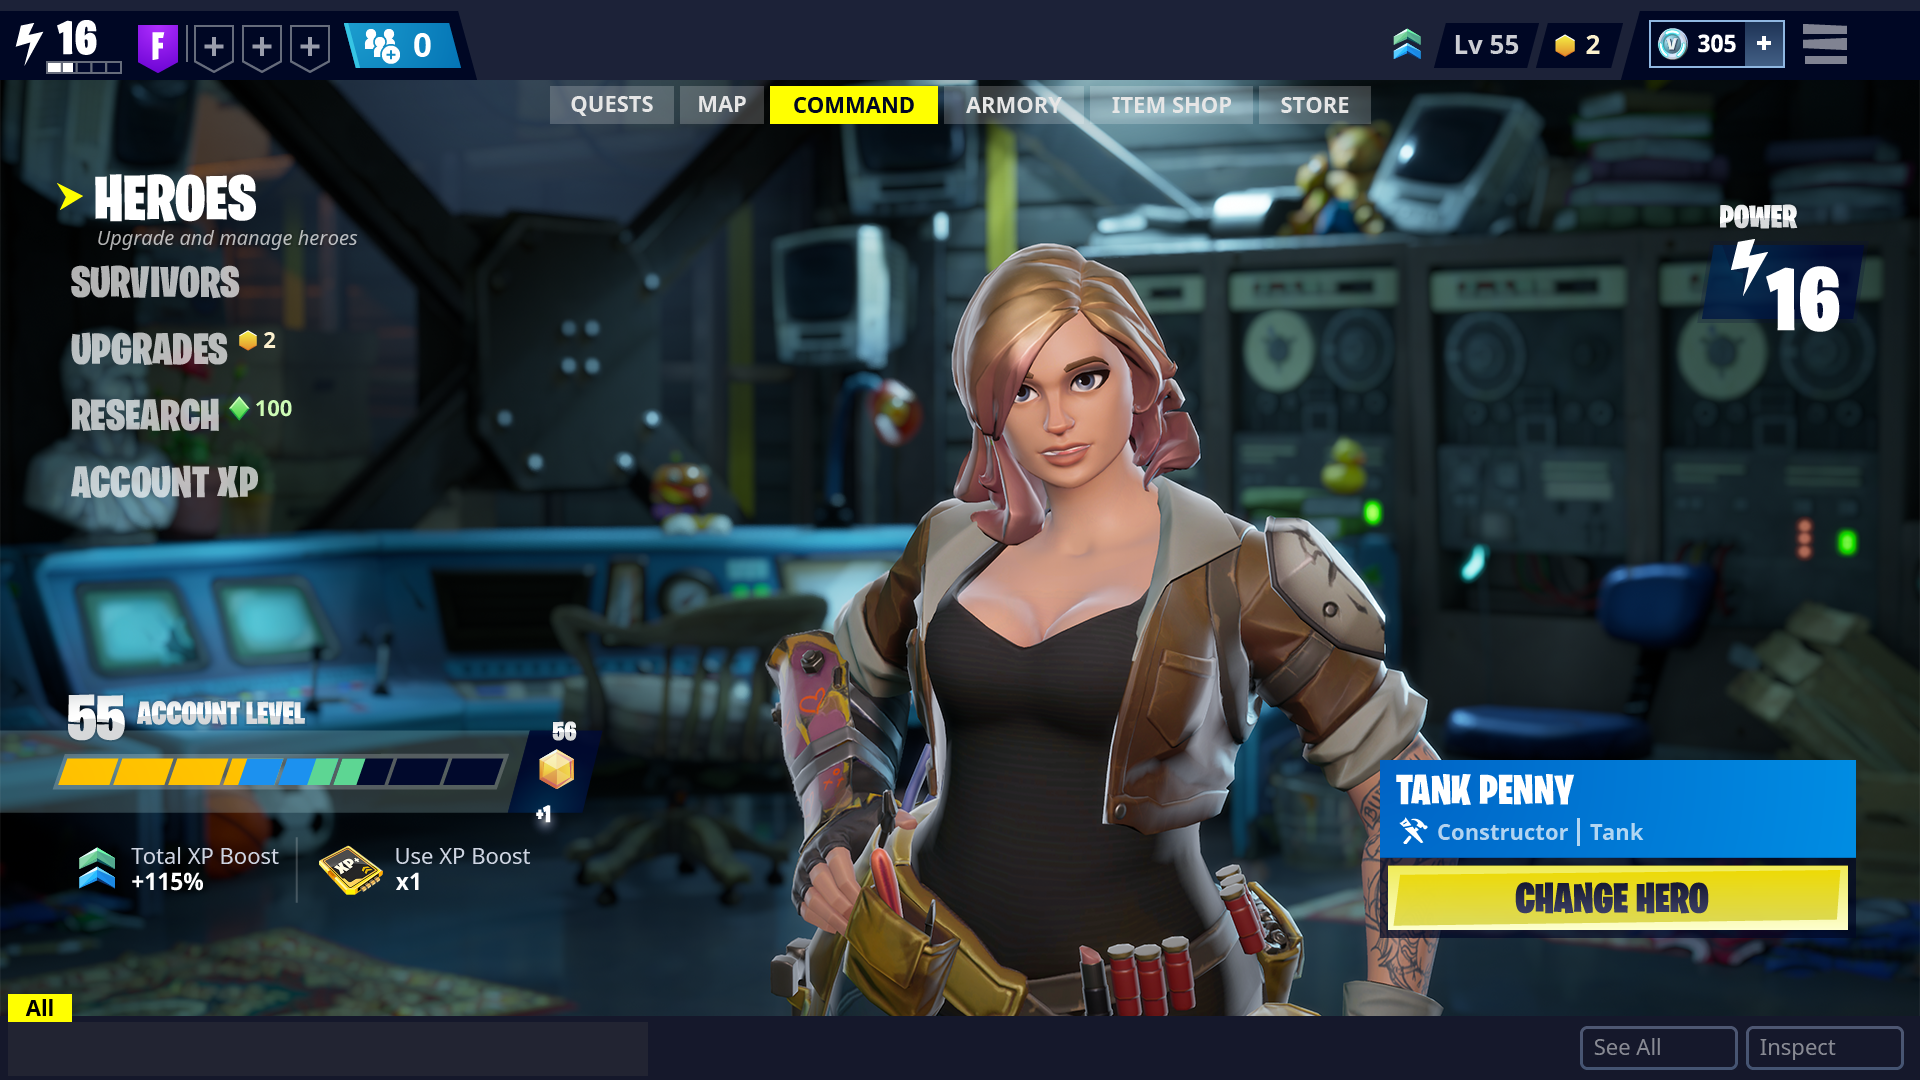 right click view image for full resolution - fortnite new ui